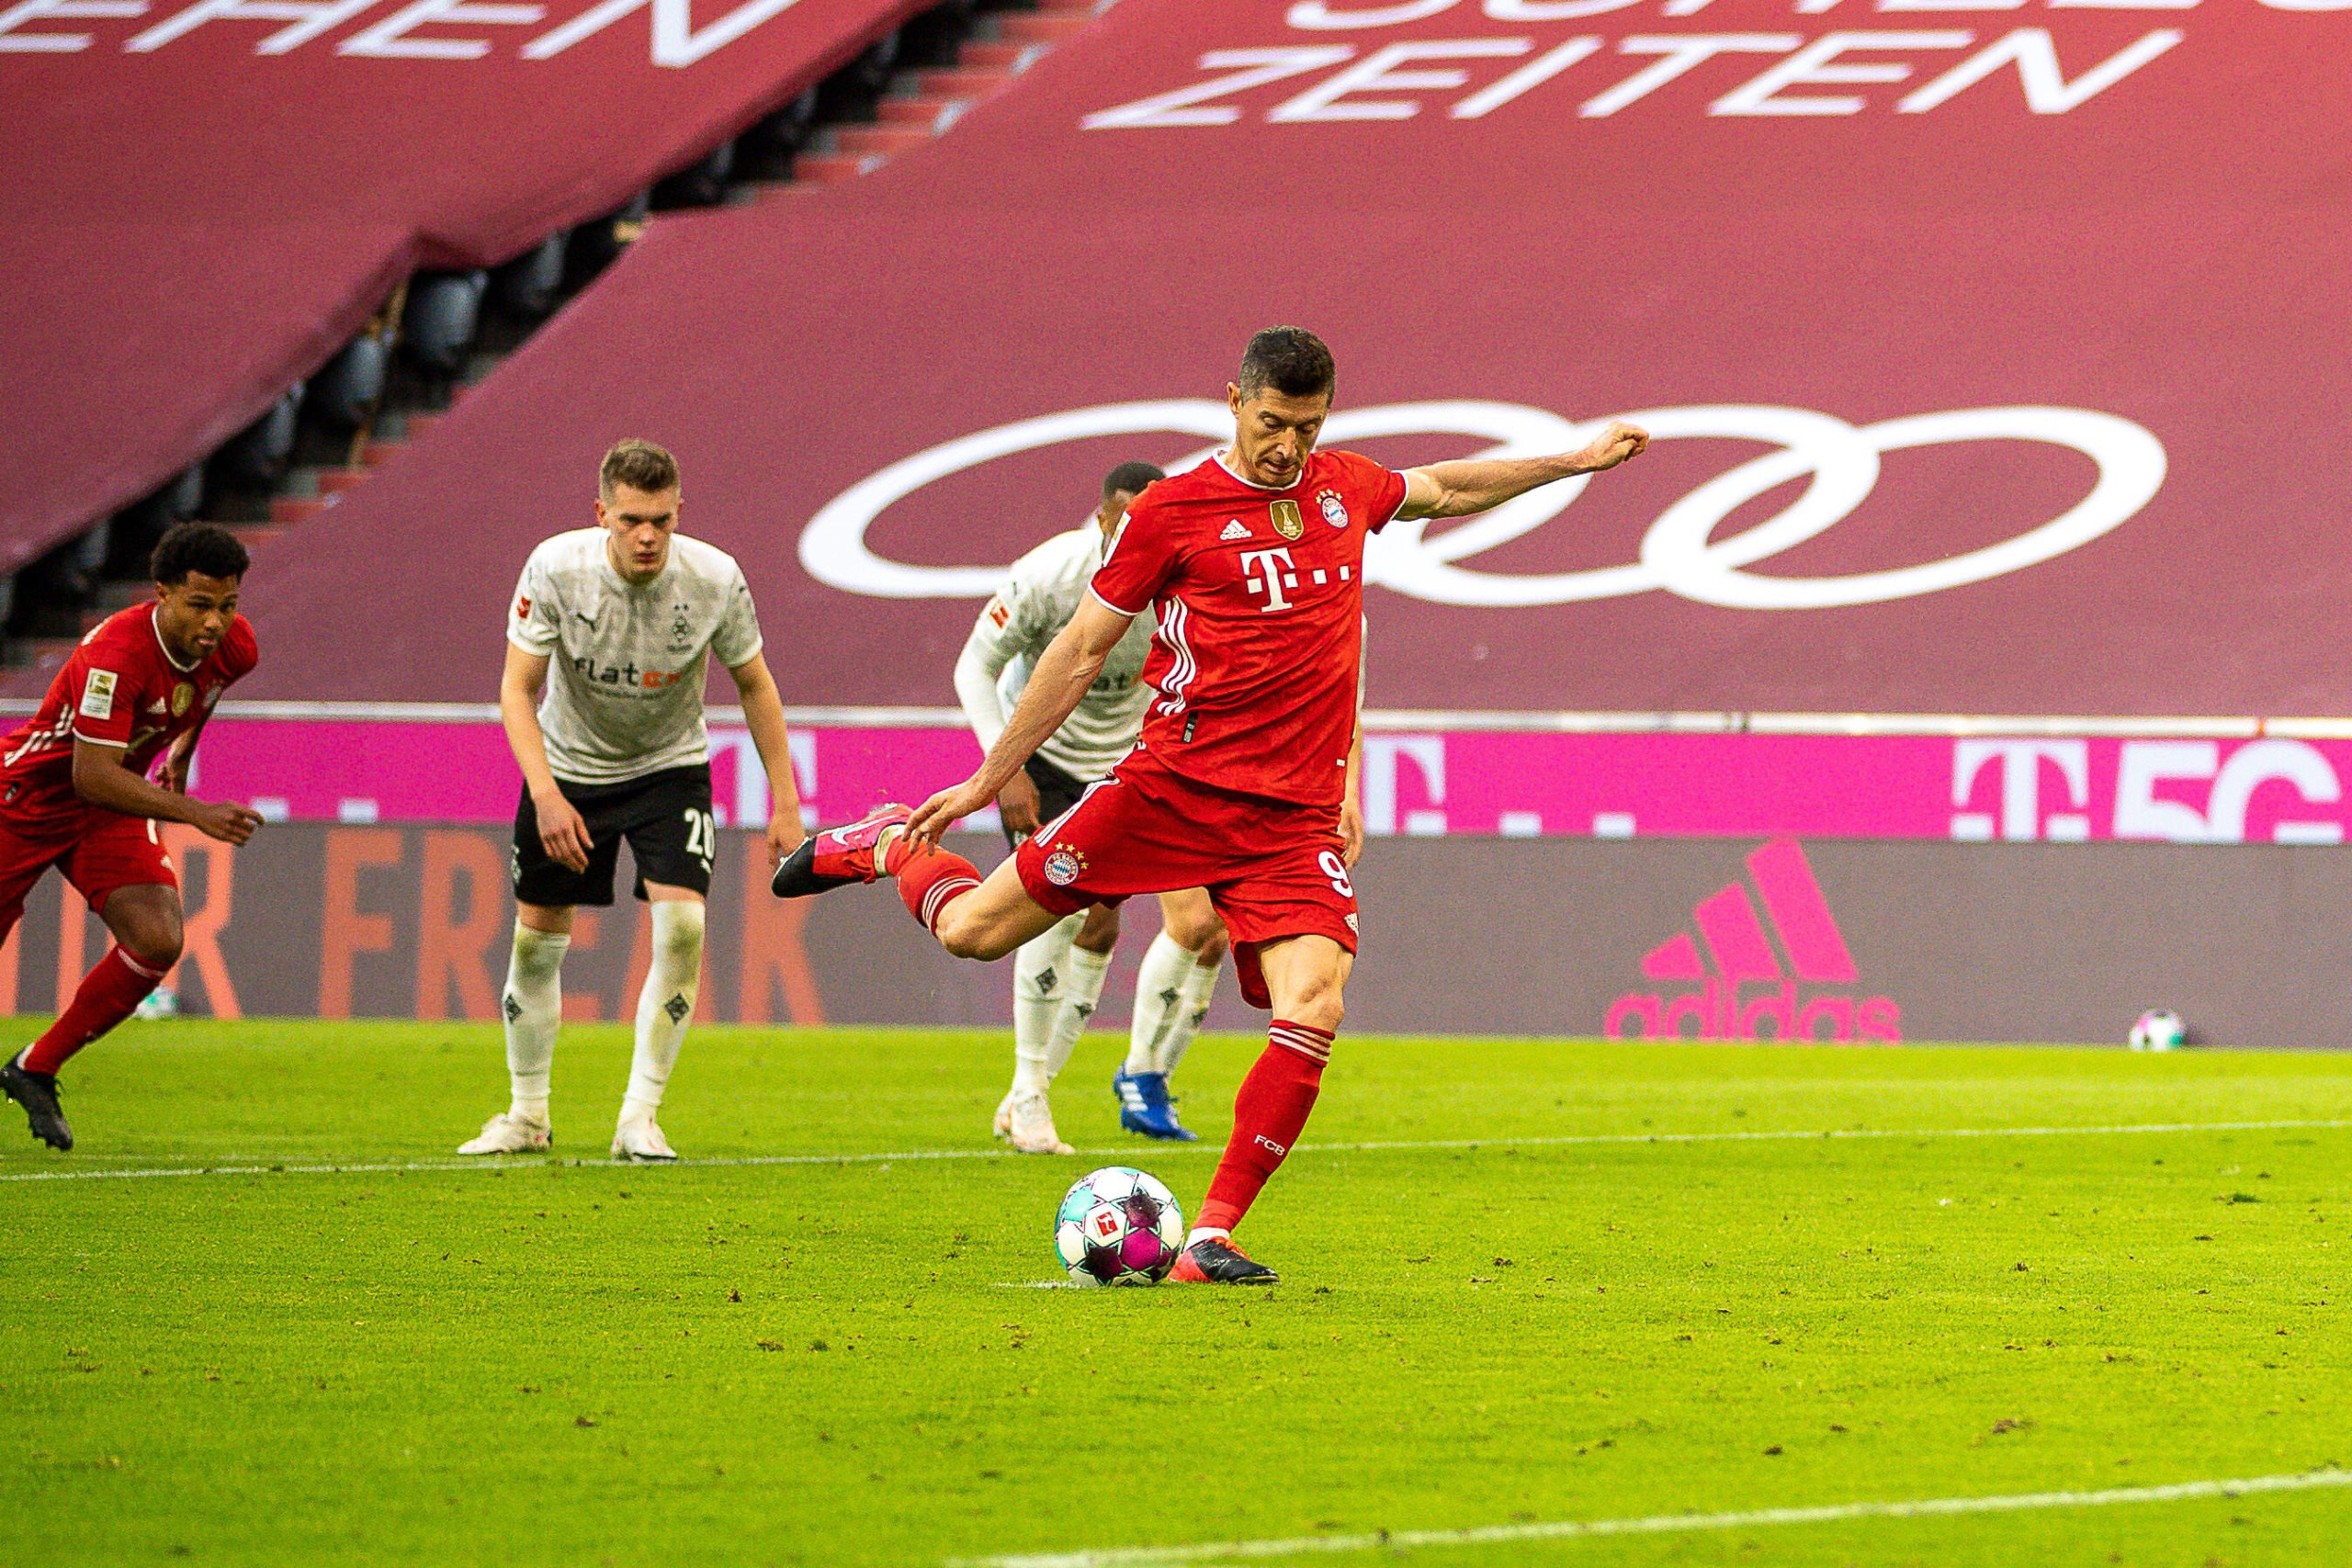 Lewandowski dreaming of a move to Real Madrid (Lewandowski is seen in the picture)